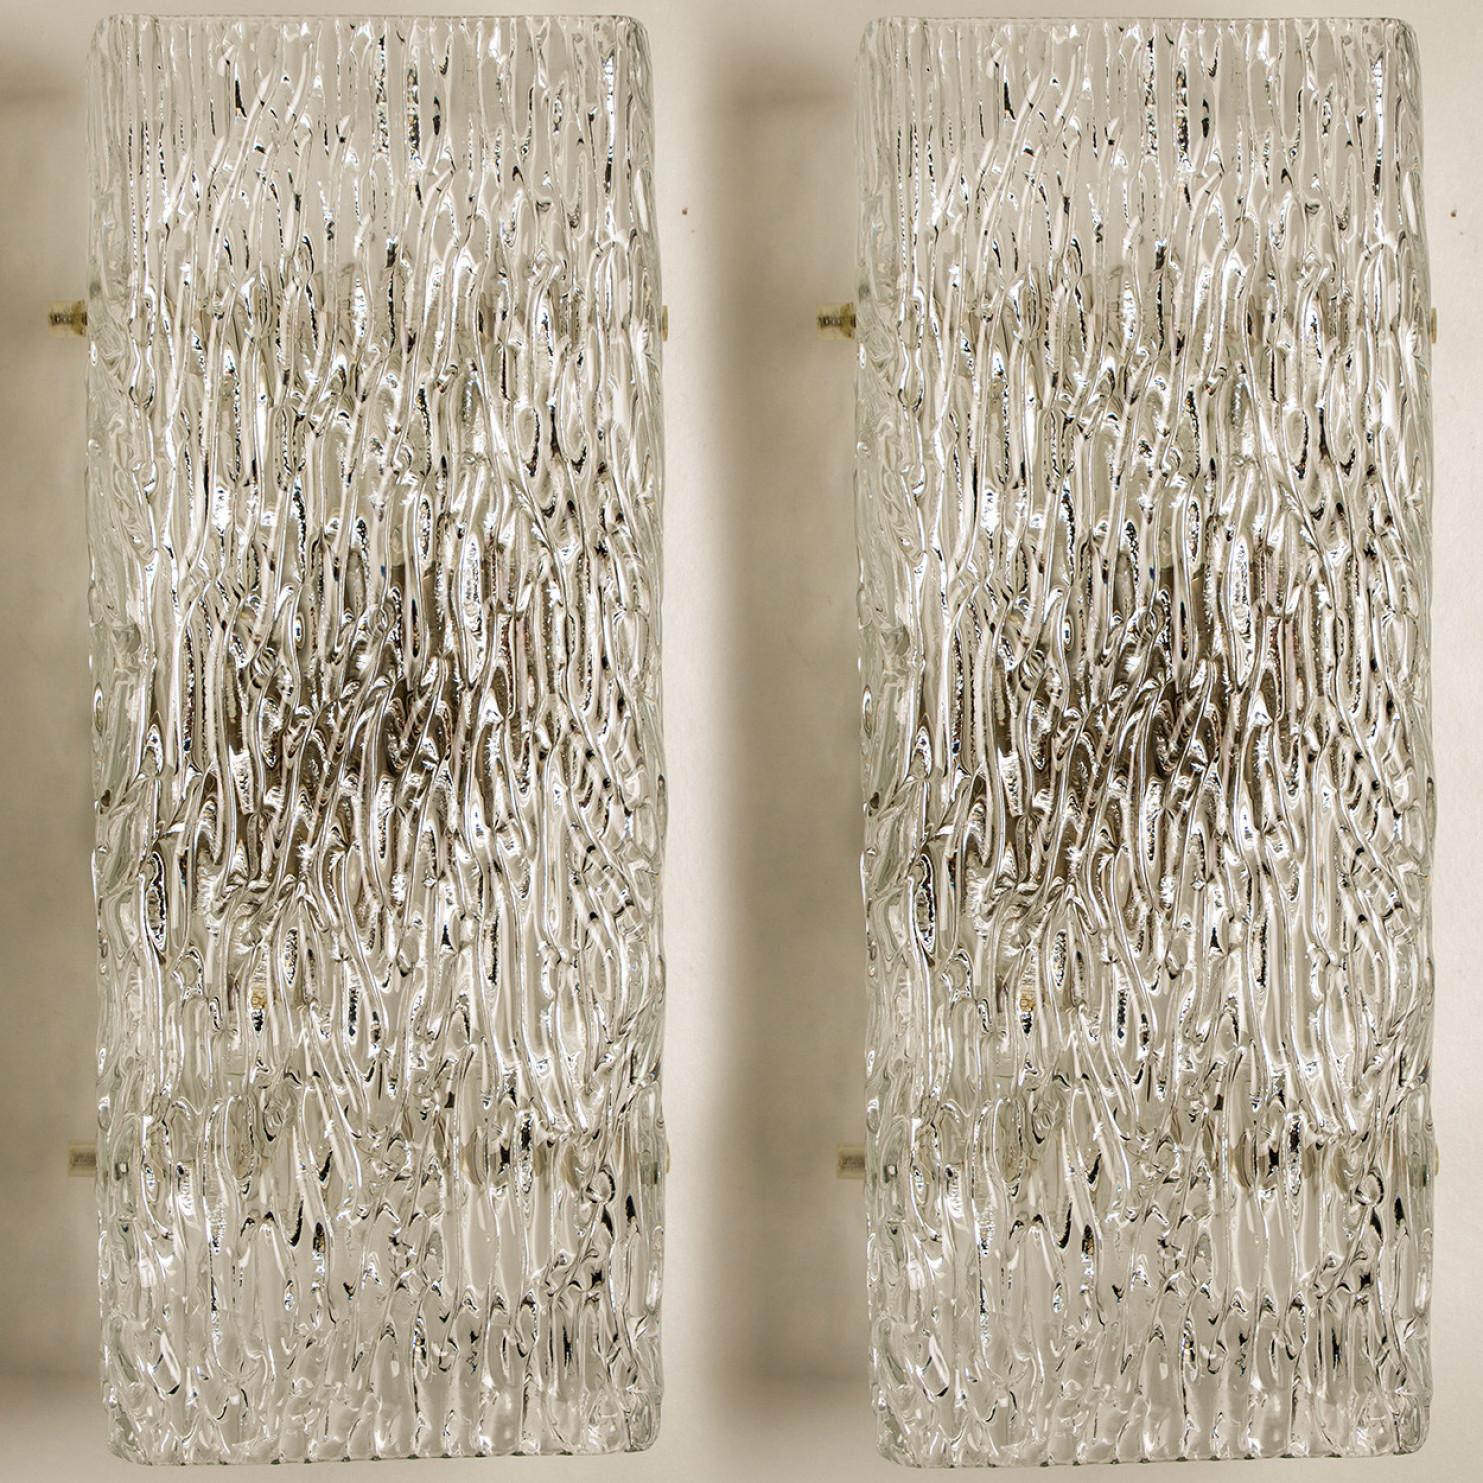 Steel Large Textured Rock Wave Glass Wall Lights by J.T. Kalmar, Austria, 1960s For Sale